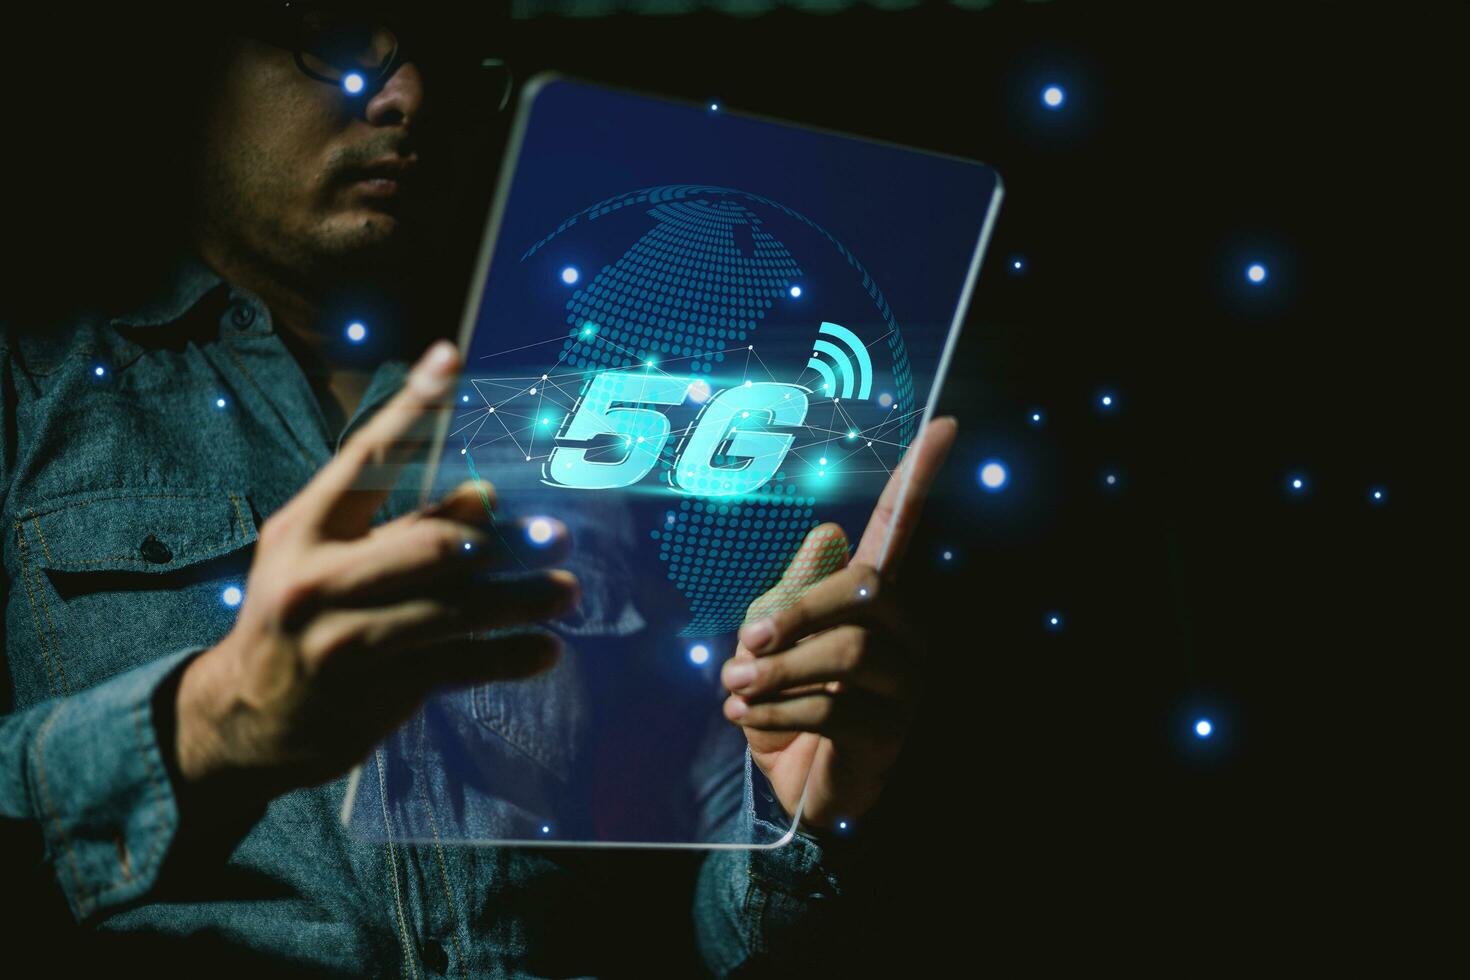 5G and internet of things or IOT concept, Hand touching virtual 5G signal. IOT is high technology which every device will connect and control by 5G high speed internet. photo